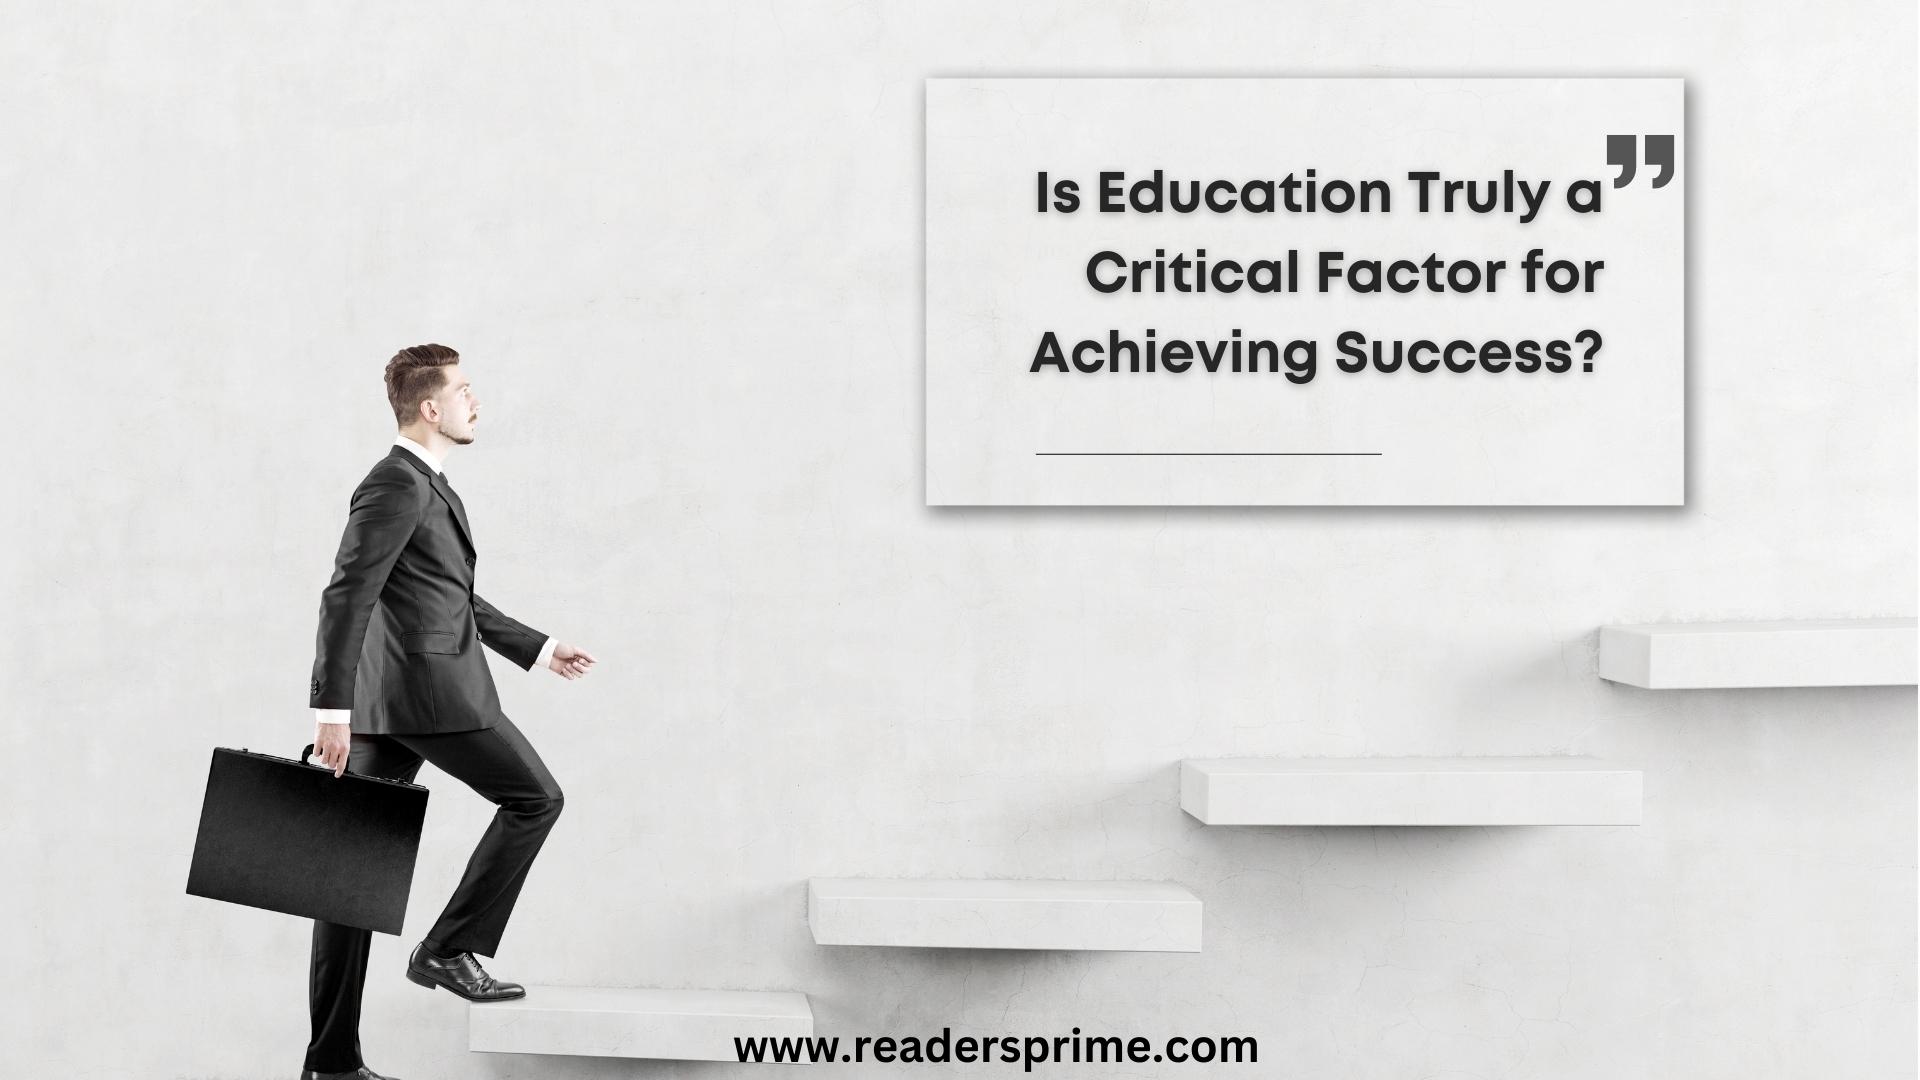 Is Education Truly a Critical Factor for Achieving Success